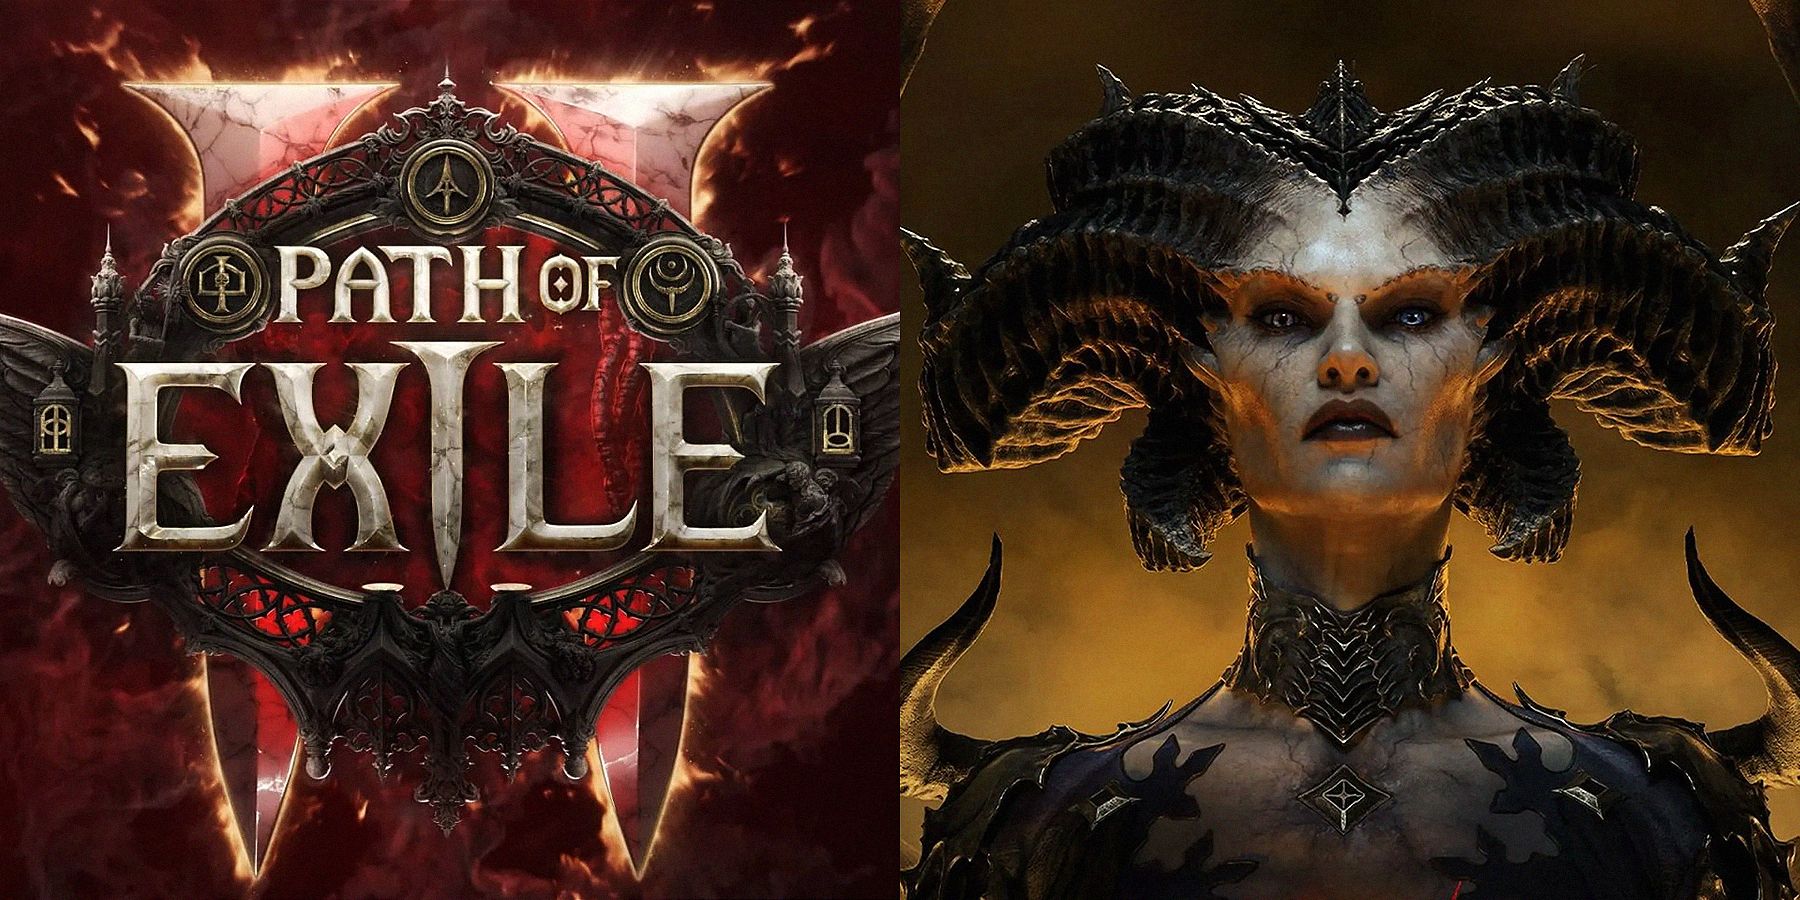 path of exile 2 developers comment on diablo 4 backlash feel sorry